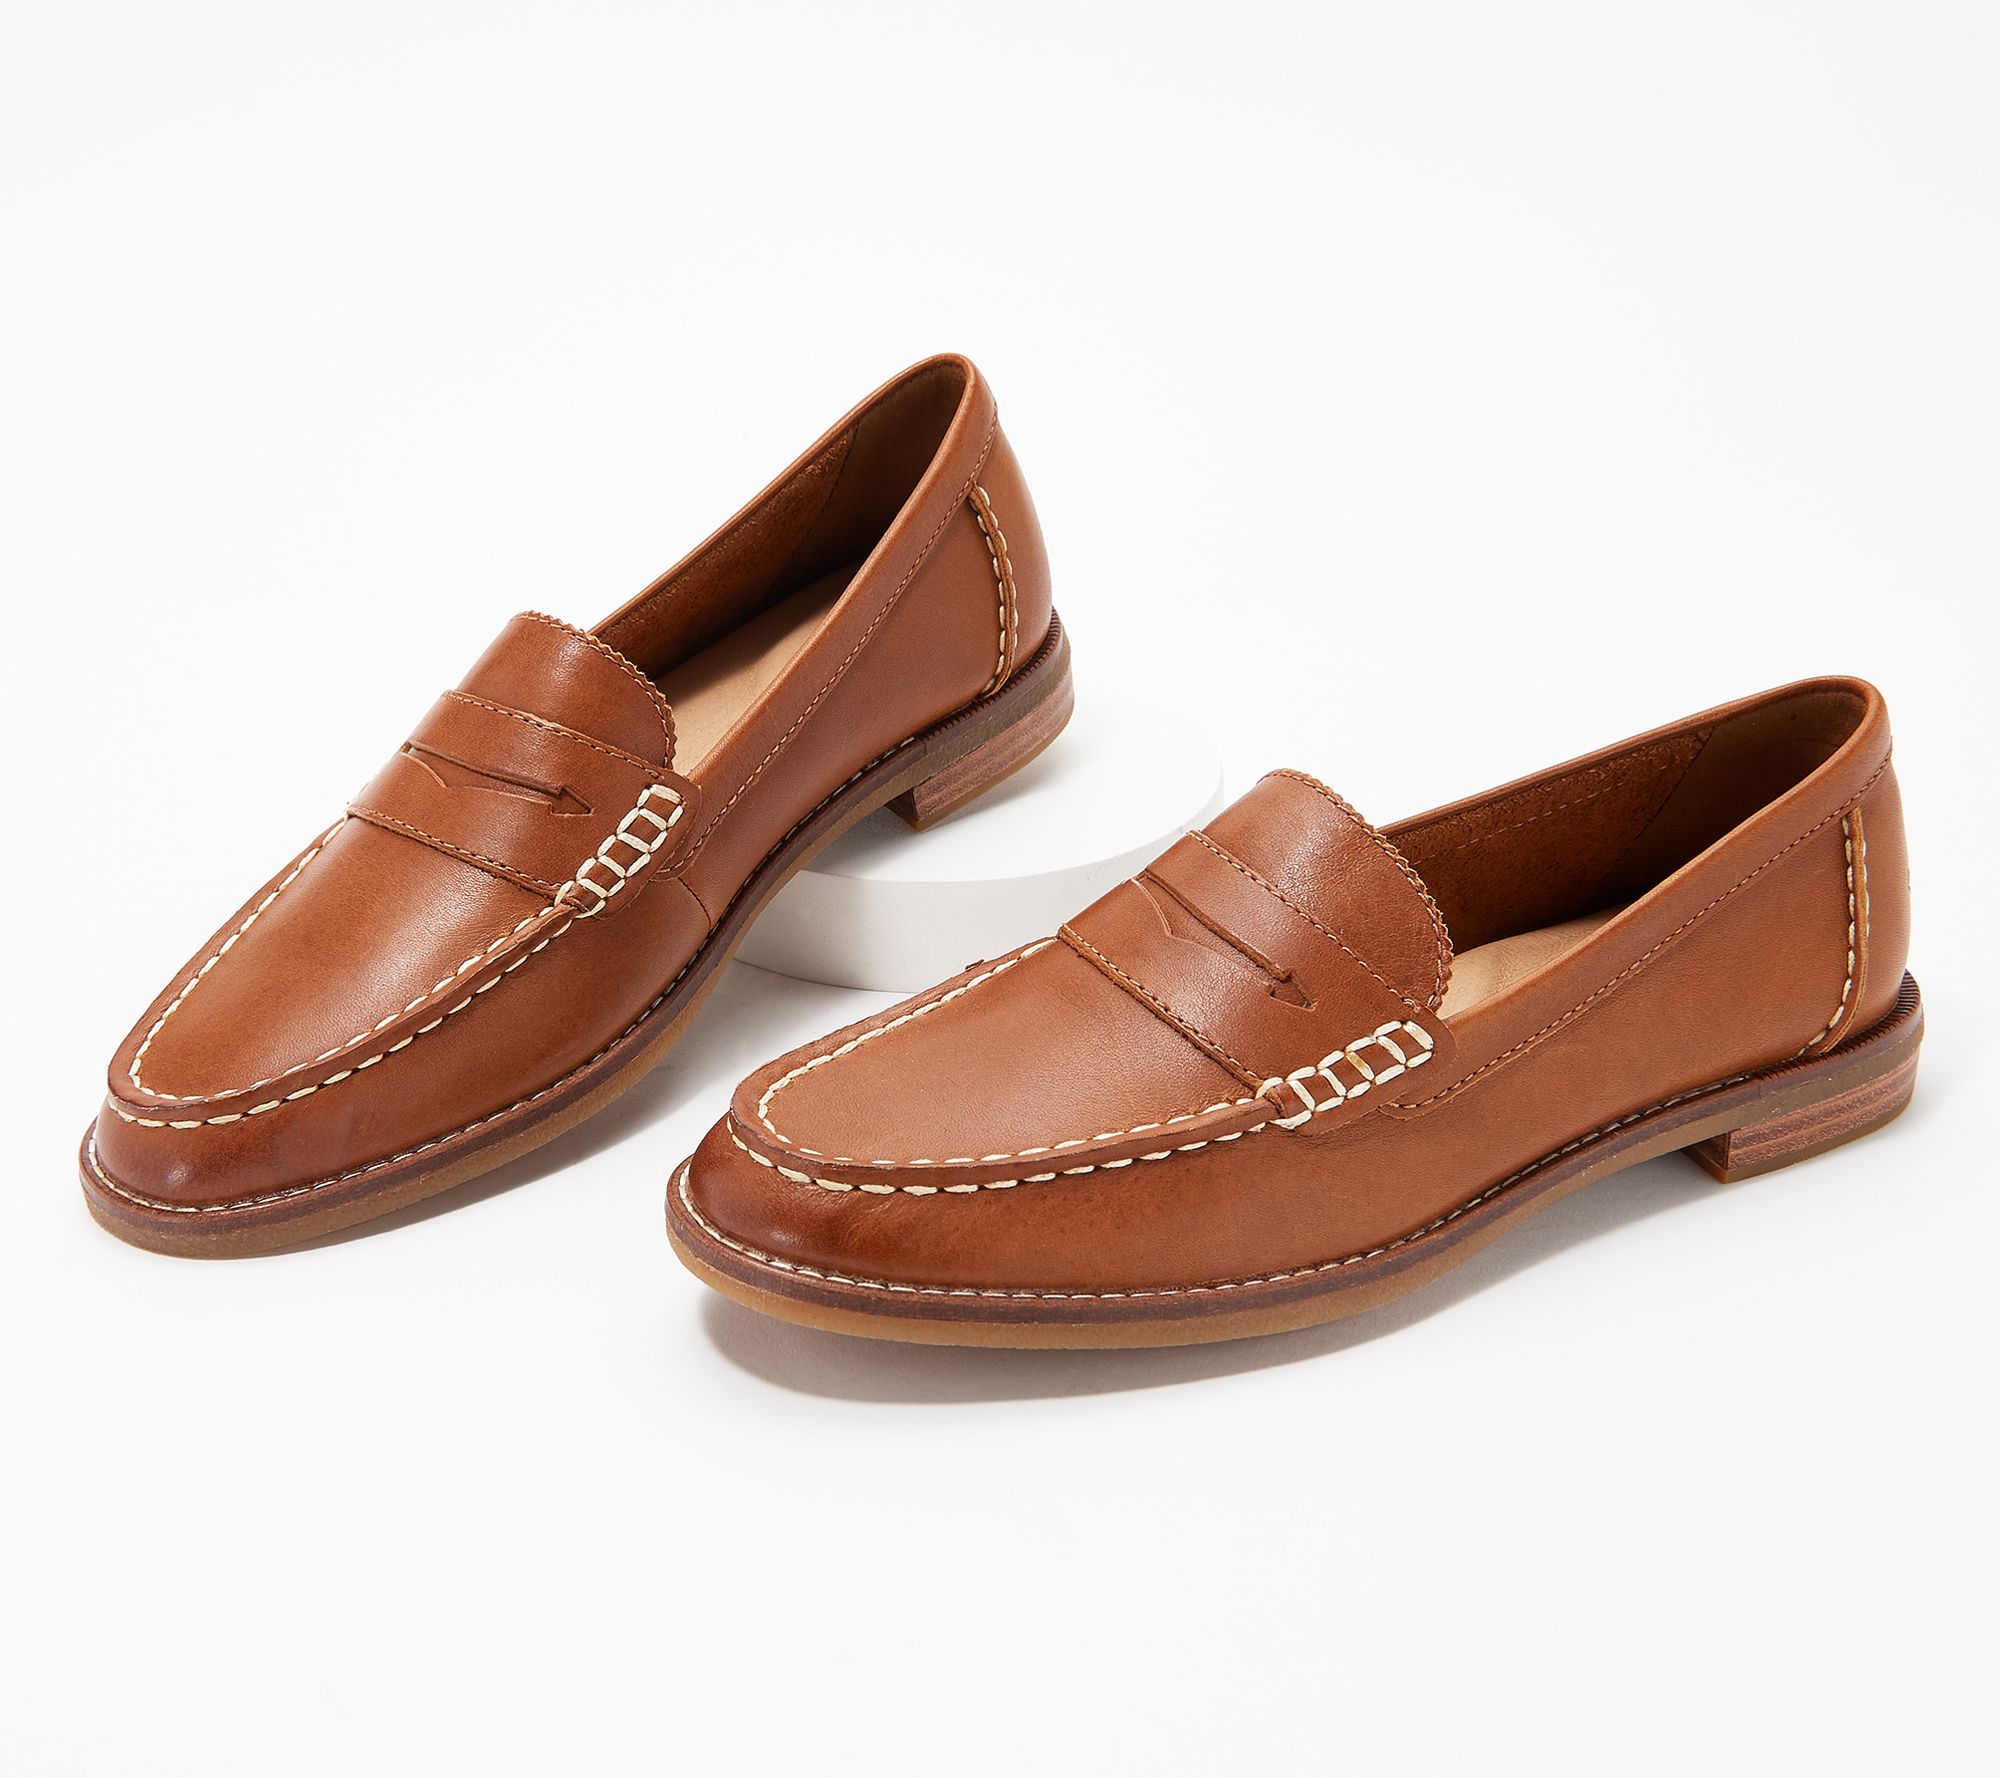 LV. textured penny loafers